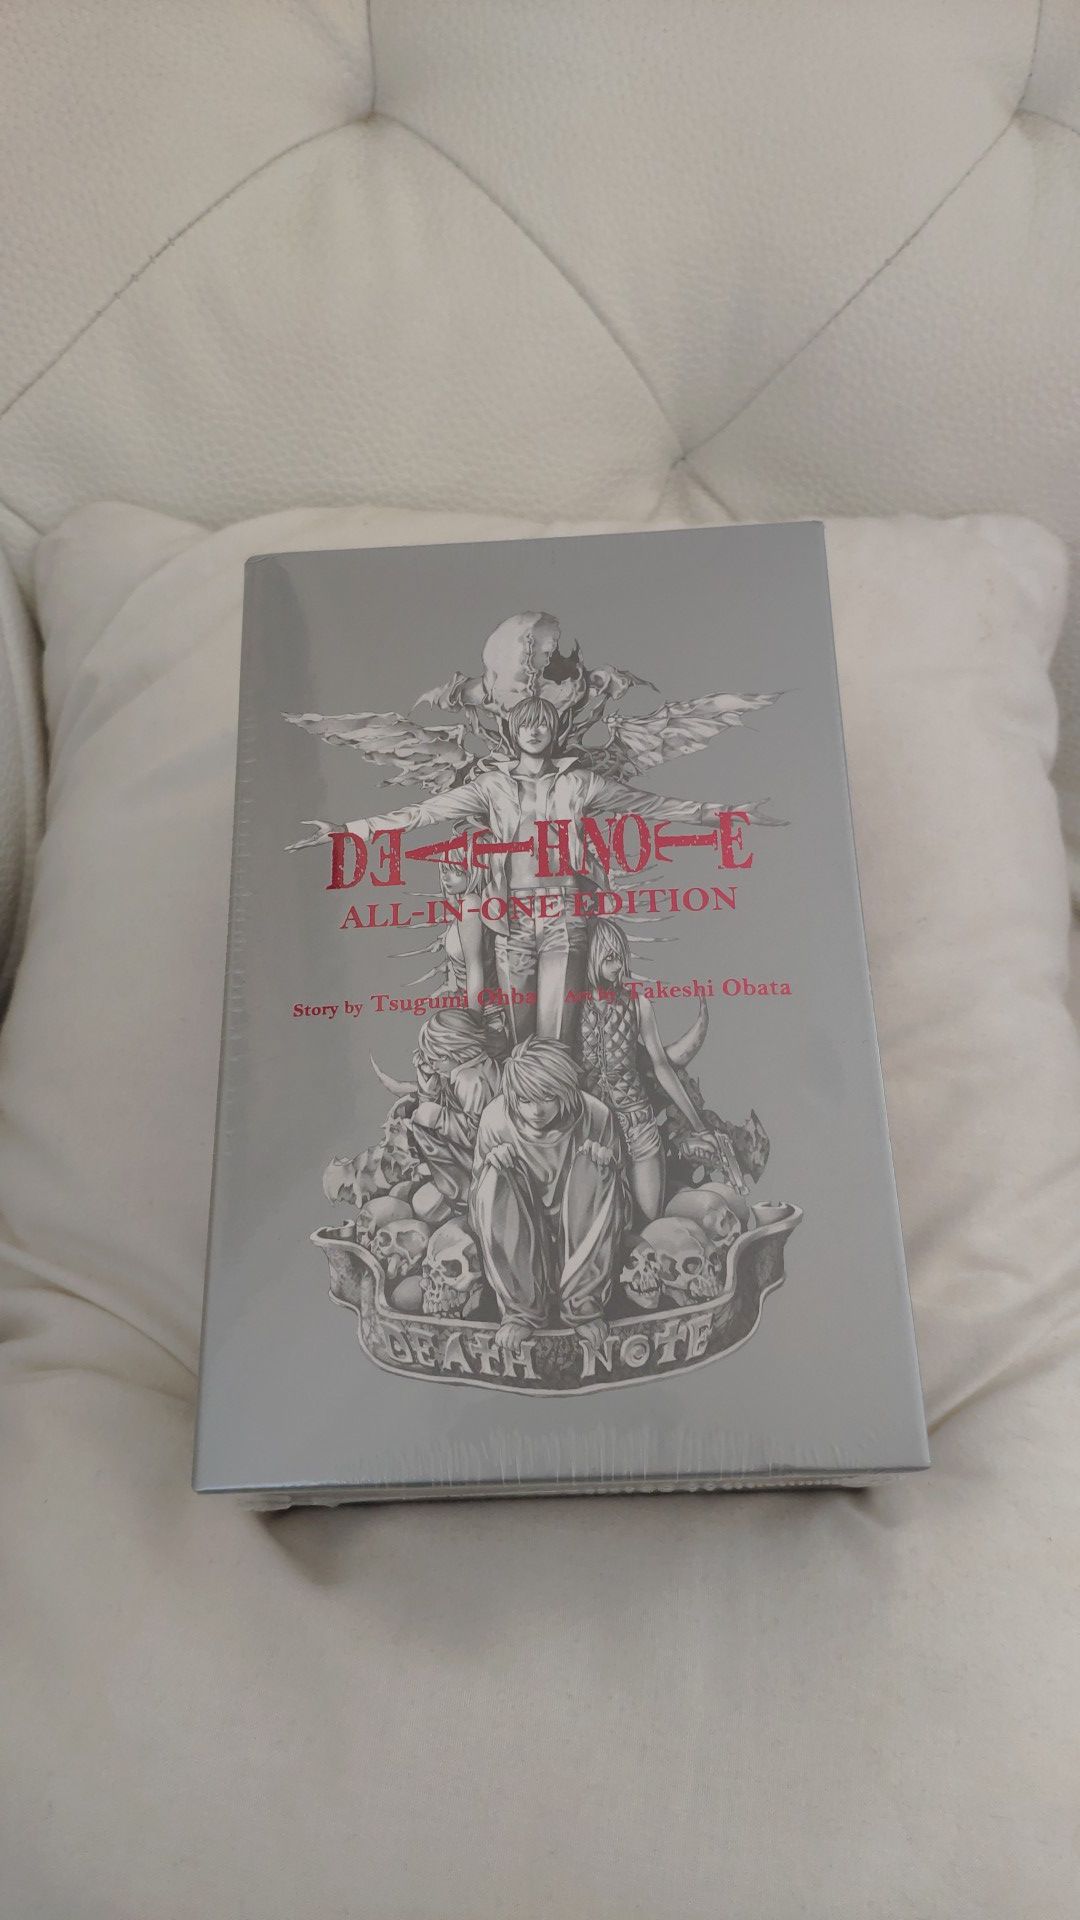 Deathnote all in one edition brand new